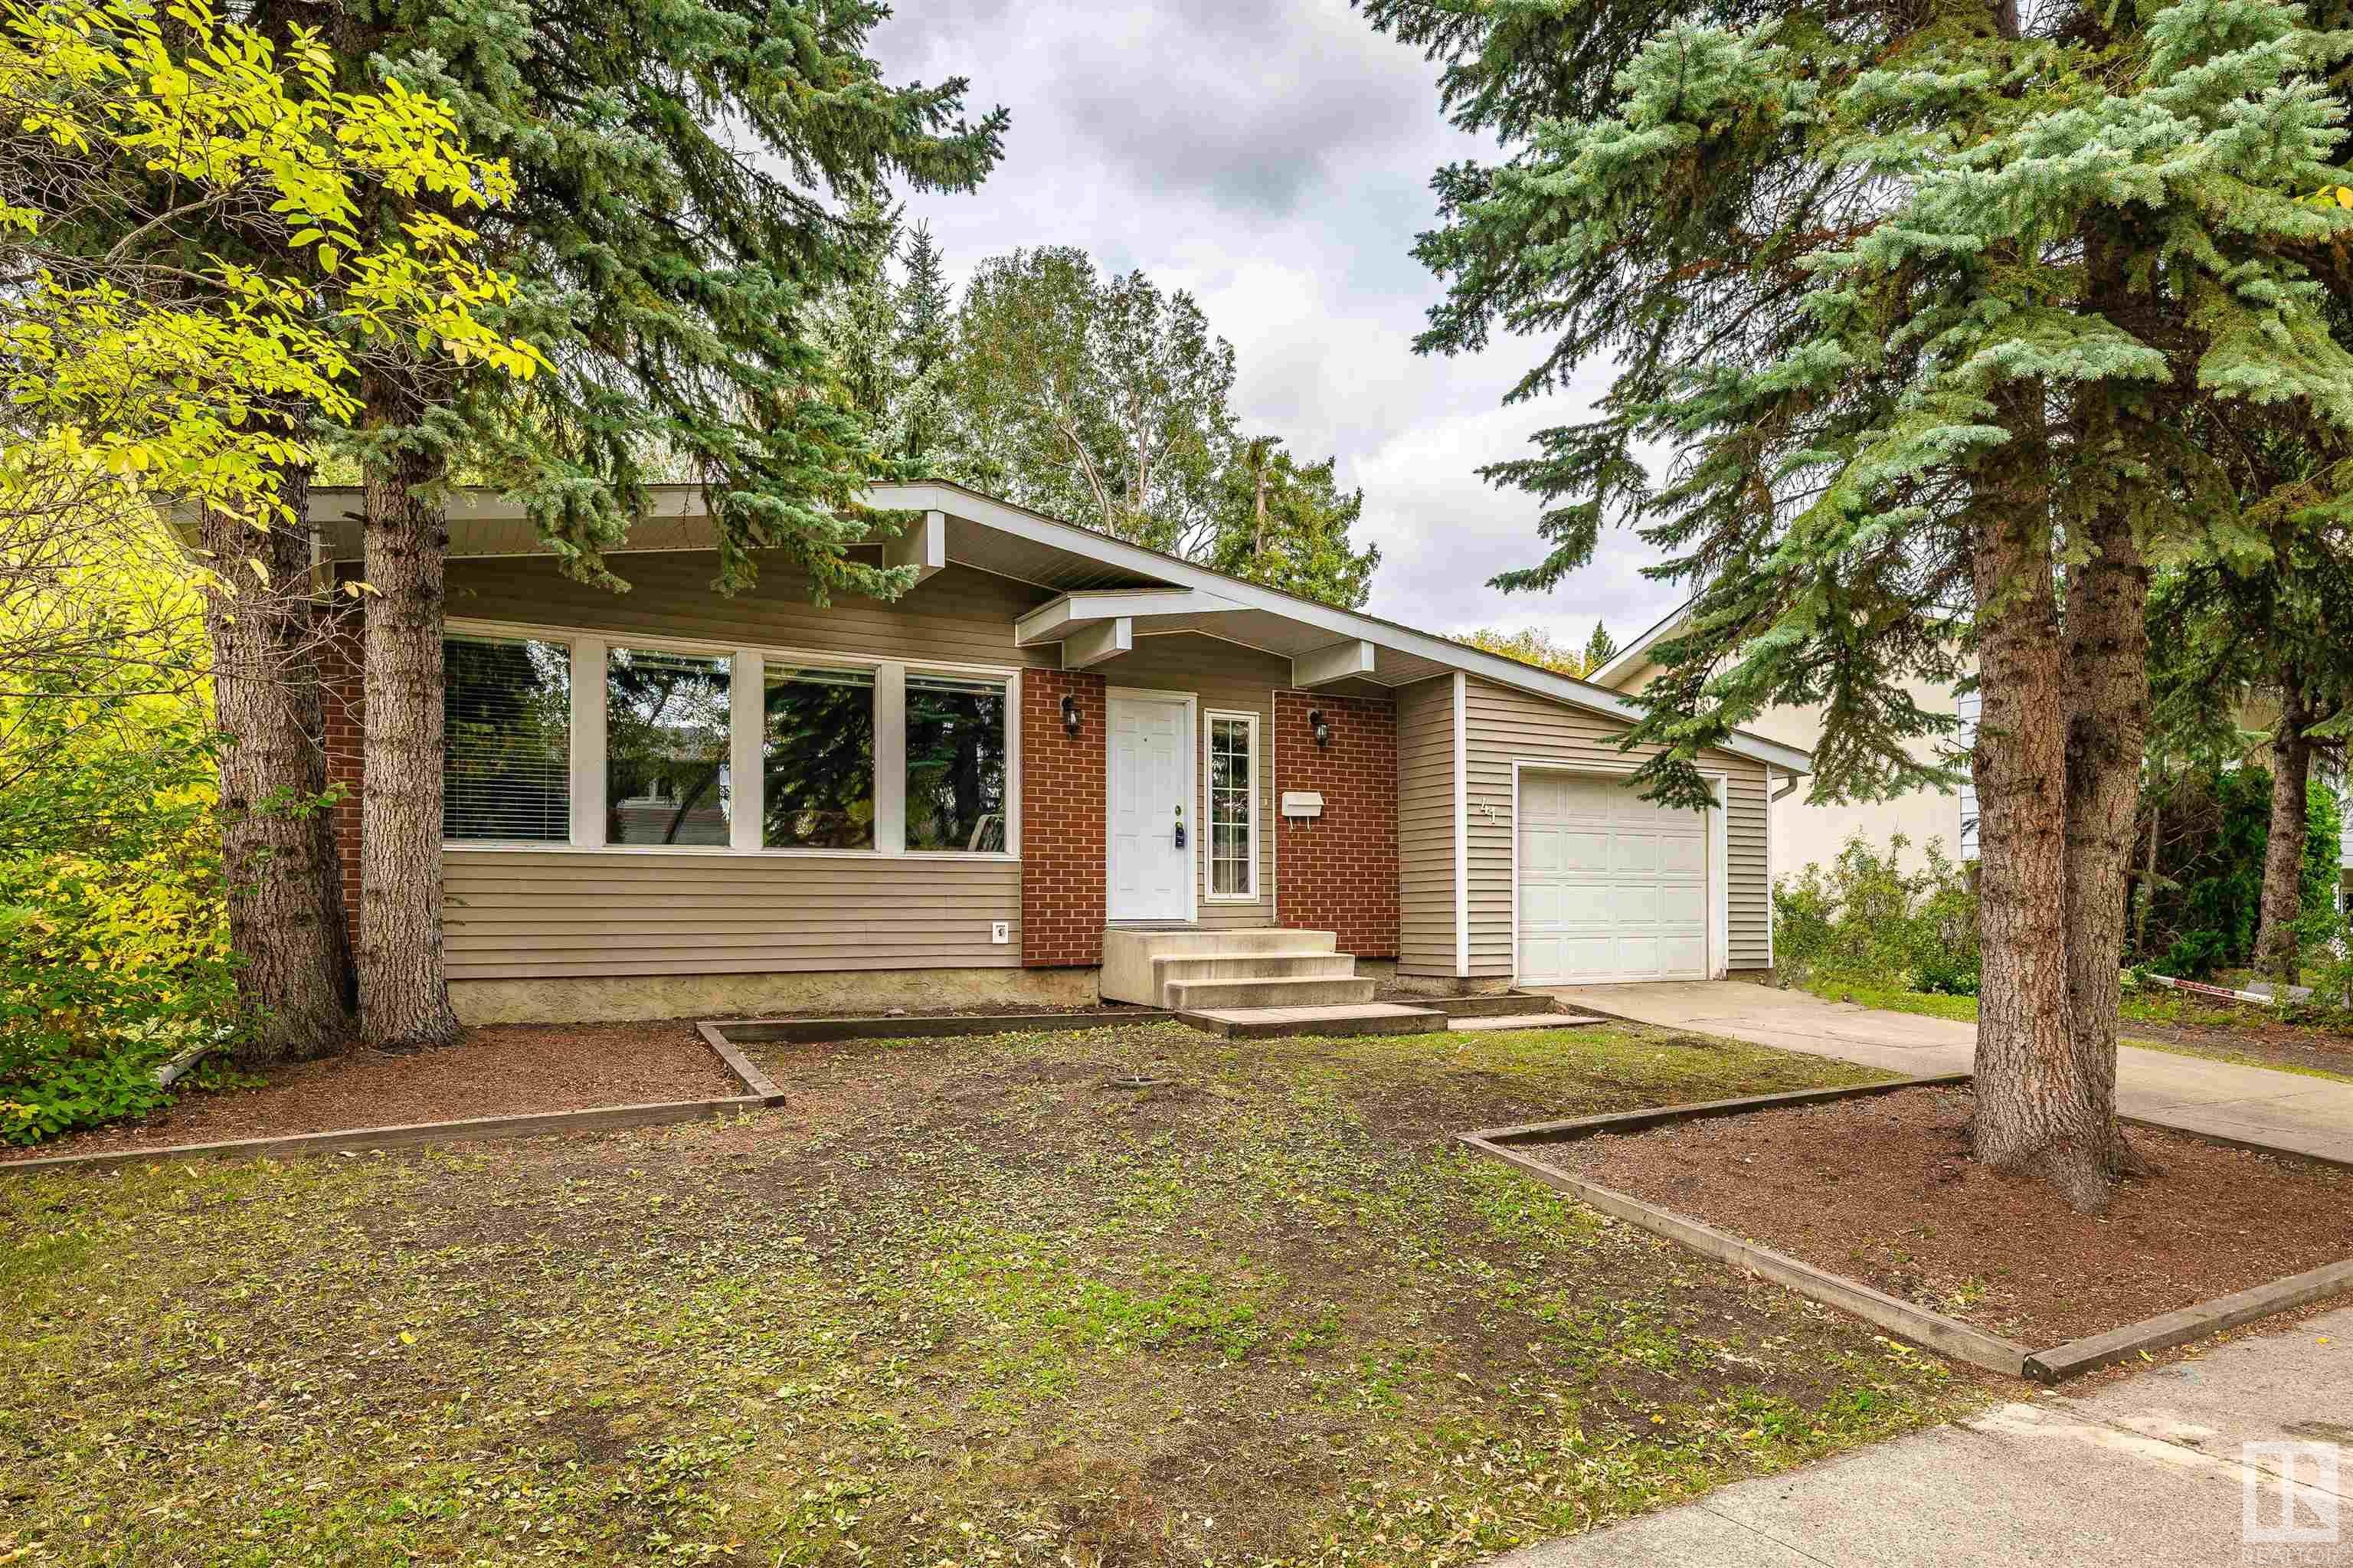 Main Photo: 41 AMBER Crescent in St. Albert: SF for sale (Akinsdale)  : MLS®# E4263652